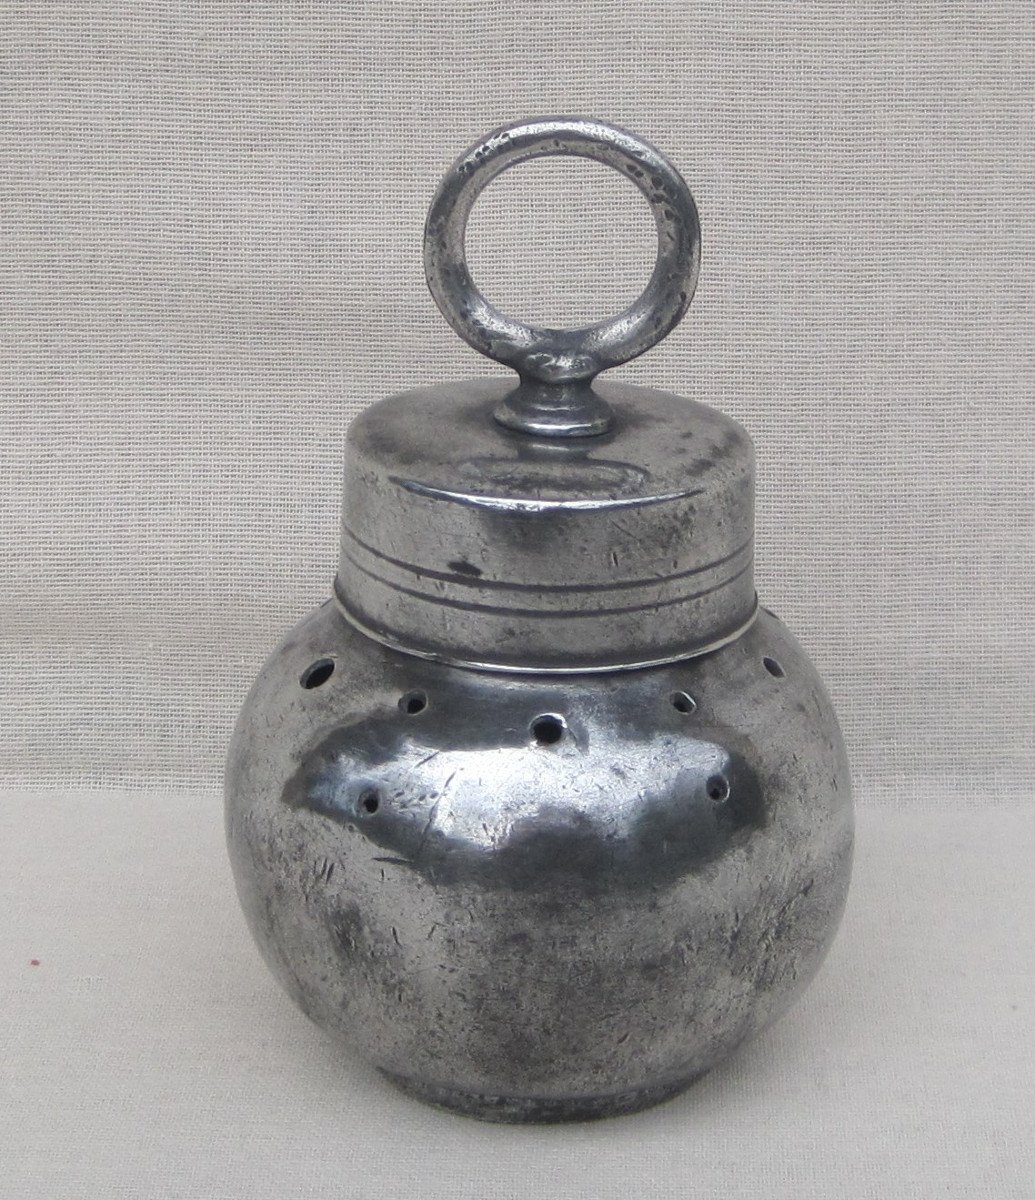 Leeing Ball, In Pewter. Medical Tins. 18th-19th Century.